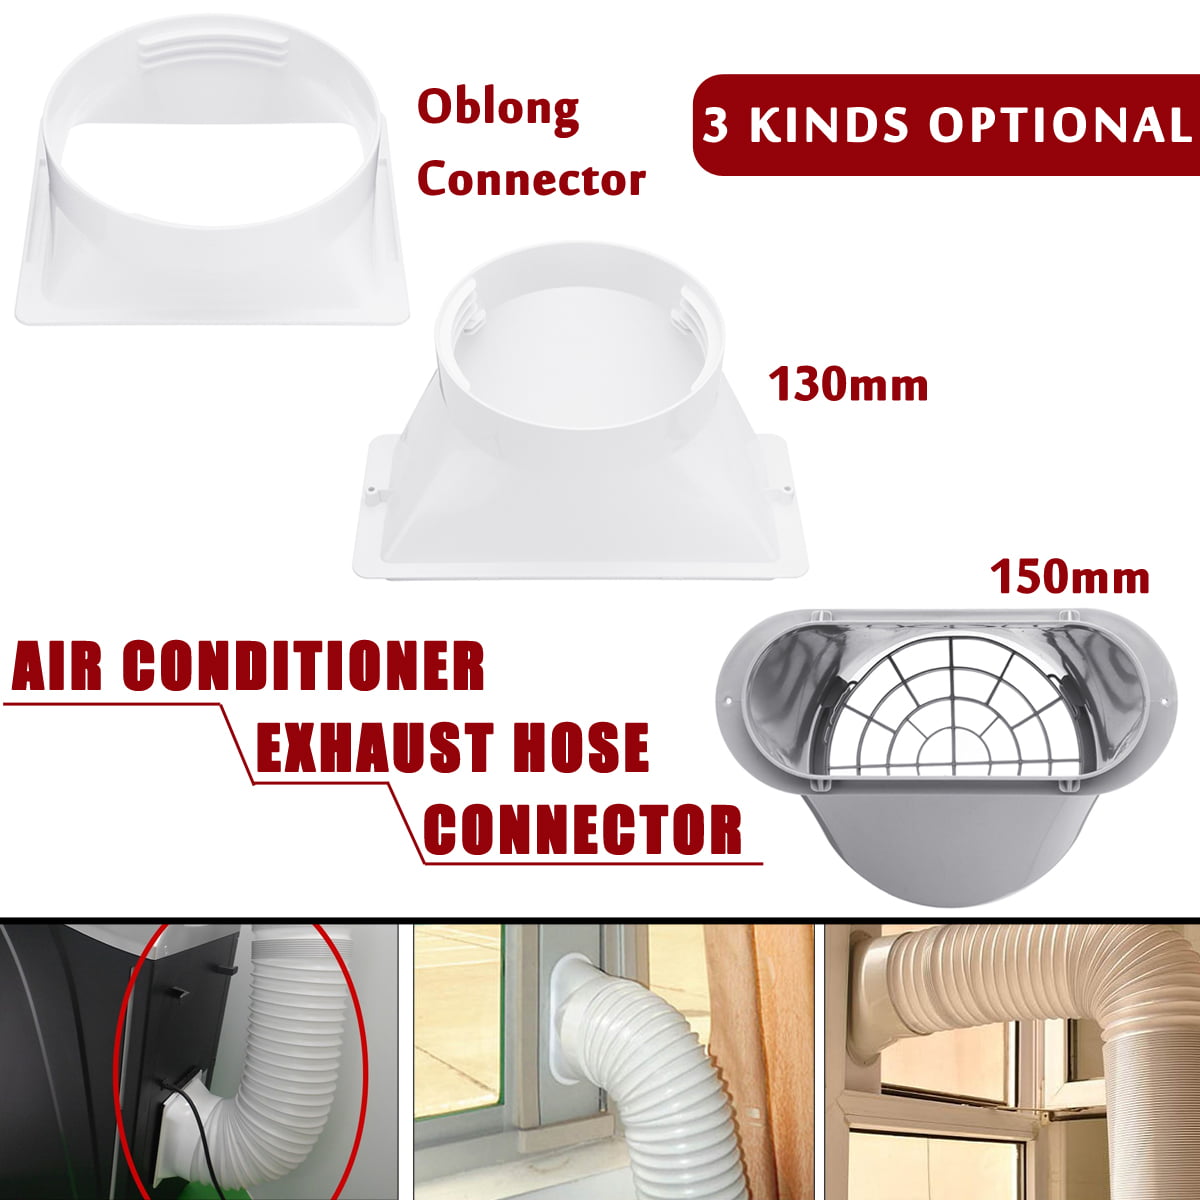 Air Conditioner Exhaust Hose Tube Adaptor For Portable Air Conditioner Tube Conn 